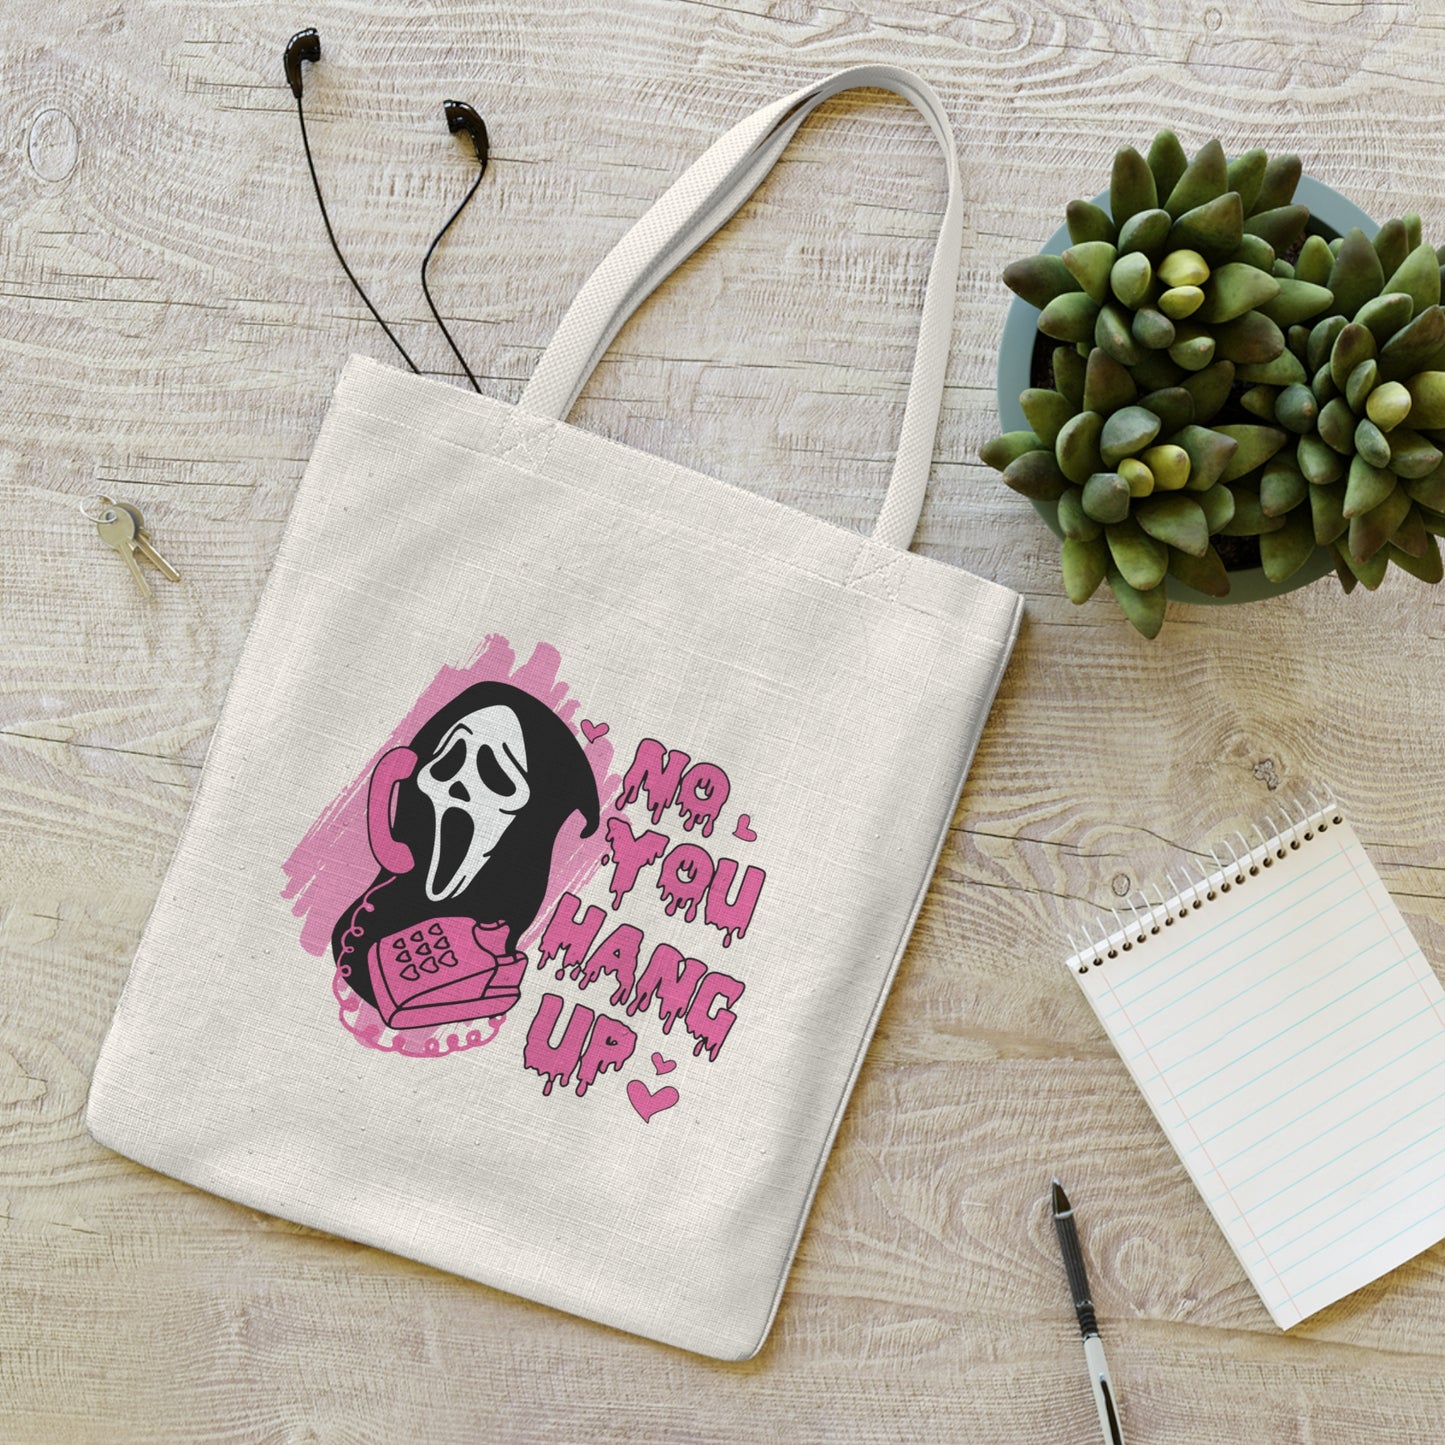 No You Hang Up (Classic) - Everyday Tote Bag